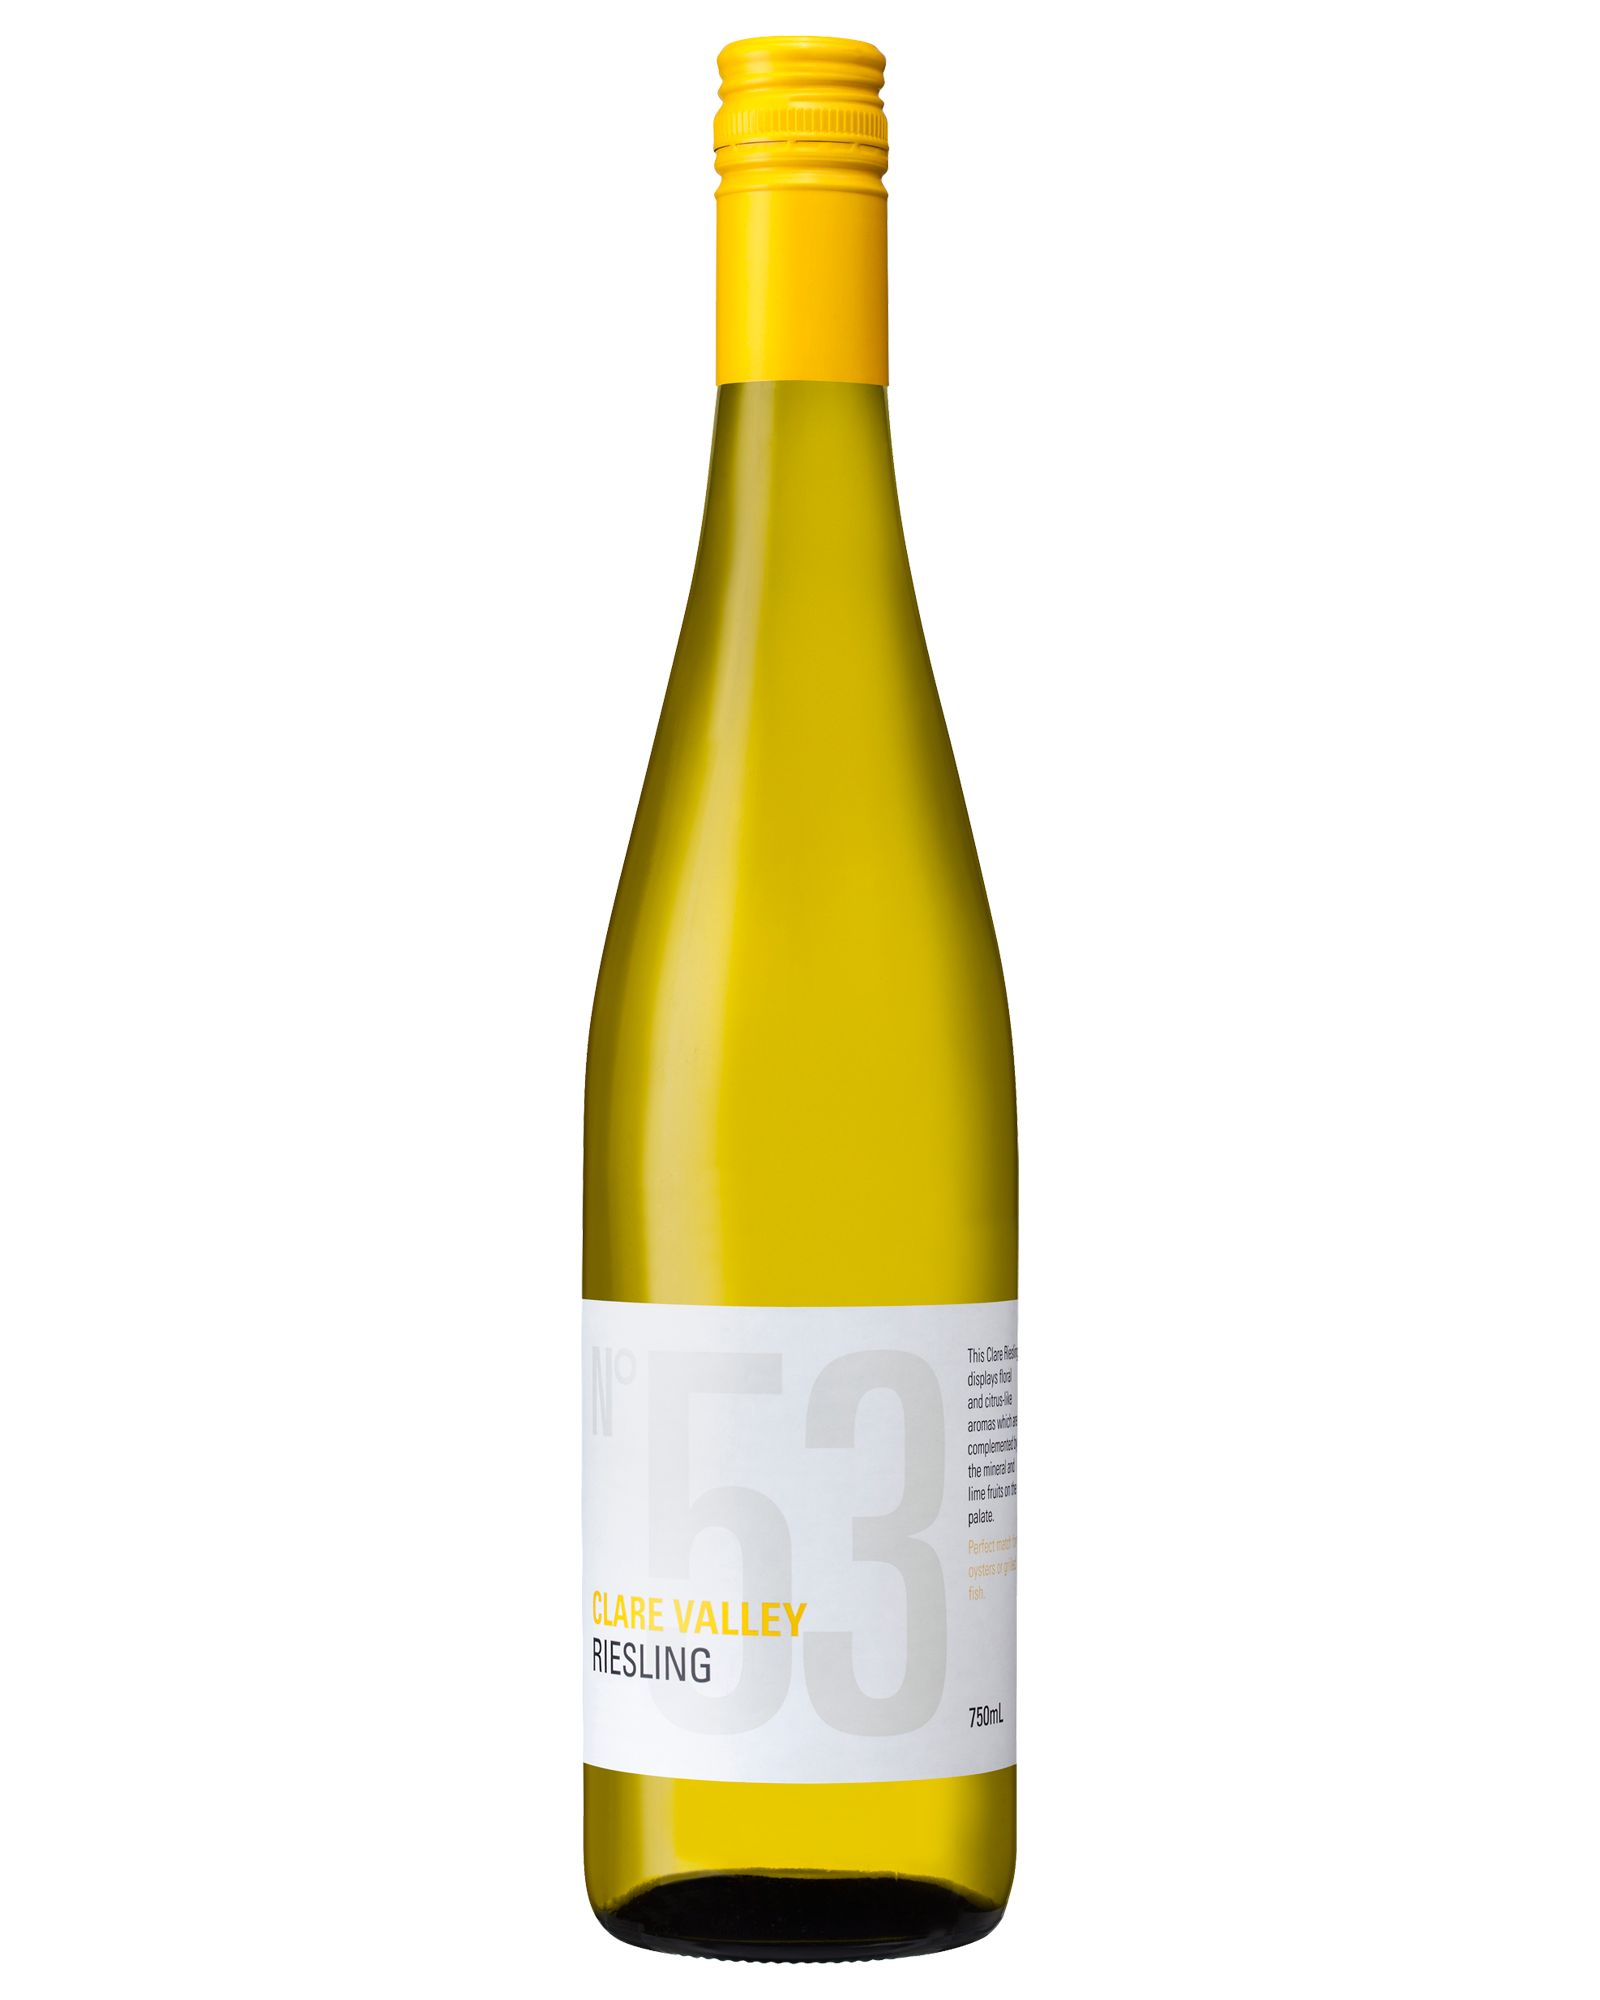 Cleanskin No 53 Clare Valley Riesling